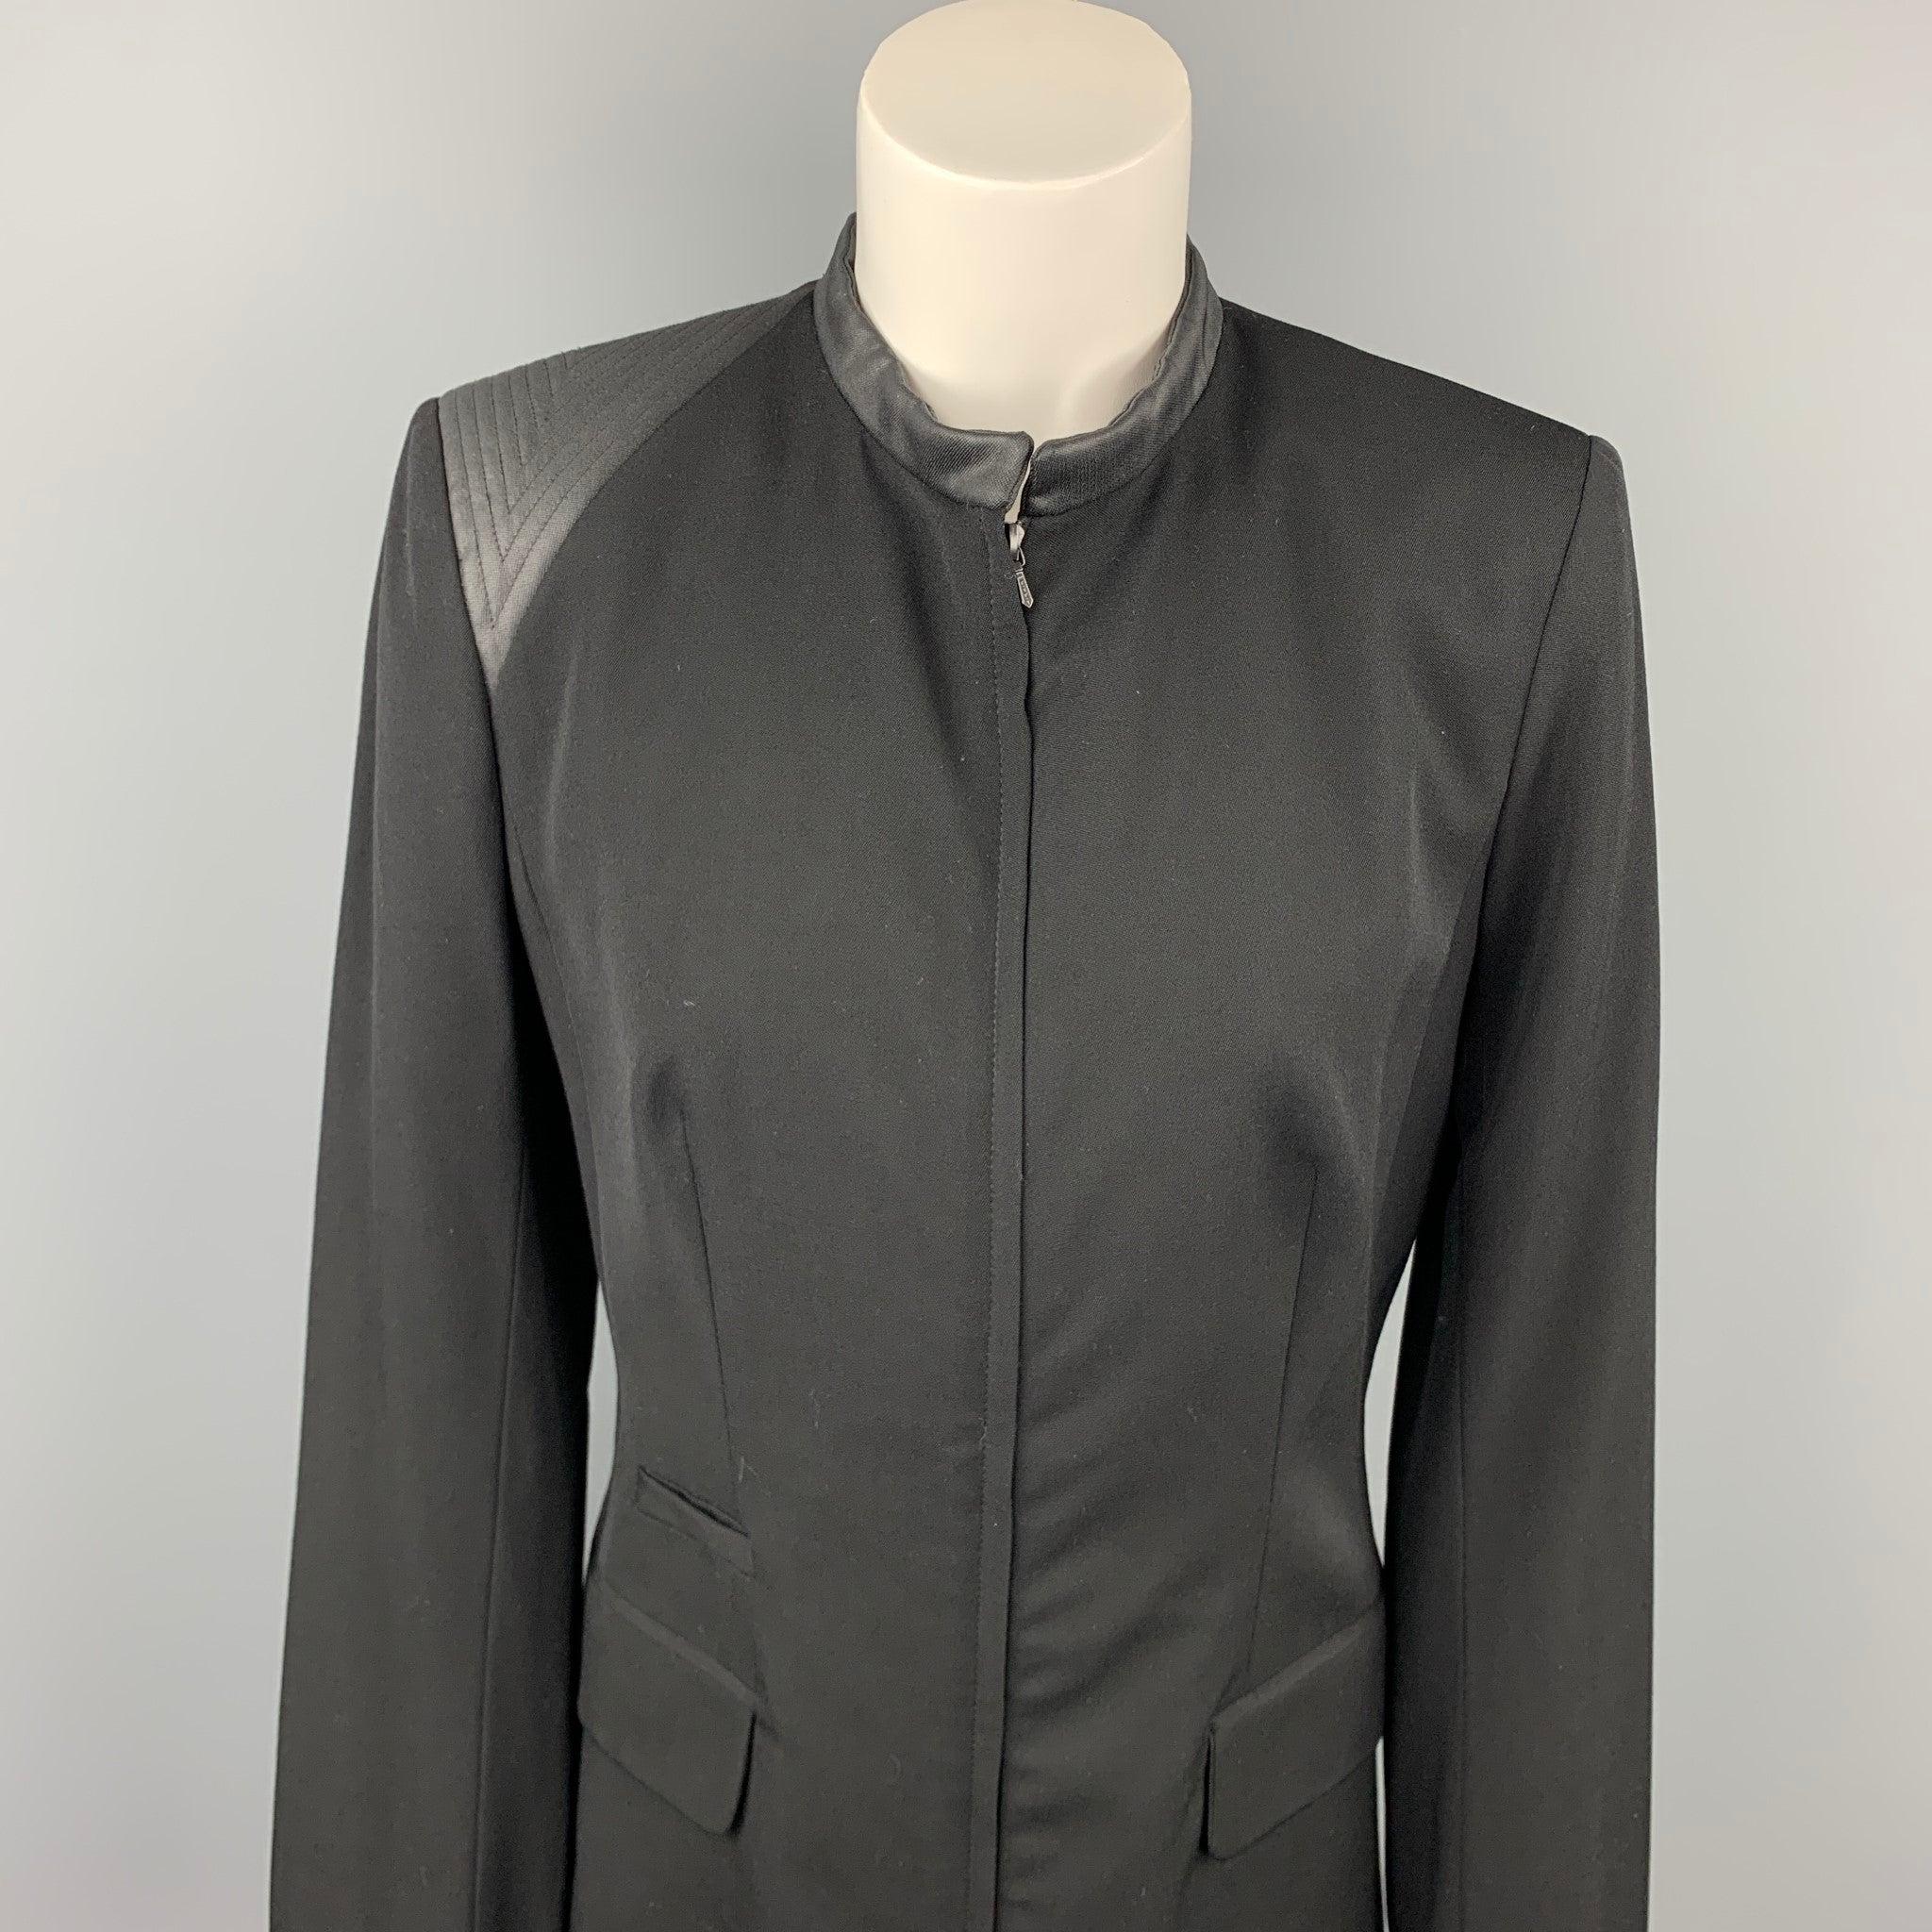 CLAUDE MONTANA jacket comes in a black two toned wool / silk featuring a ribbed hem, shoulder pads, flap pockets, and a zip up closure. Made in Italy.Very Good
Pre-Owned Condition. 

Marked:   IT 40 

Measurements: 
 
Shoulder: 15.5 inches 
Bust: 35